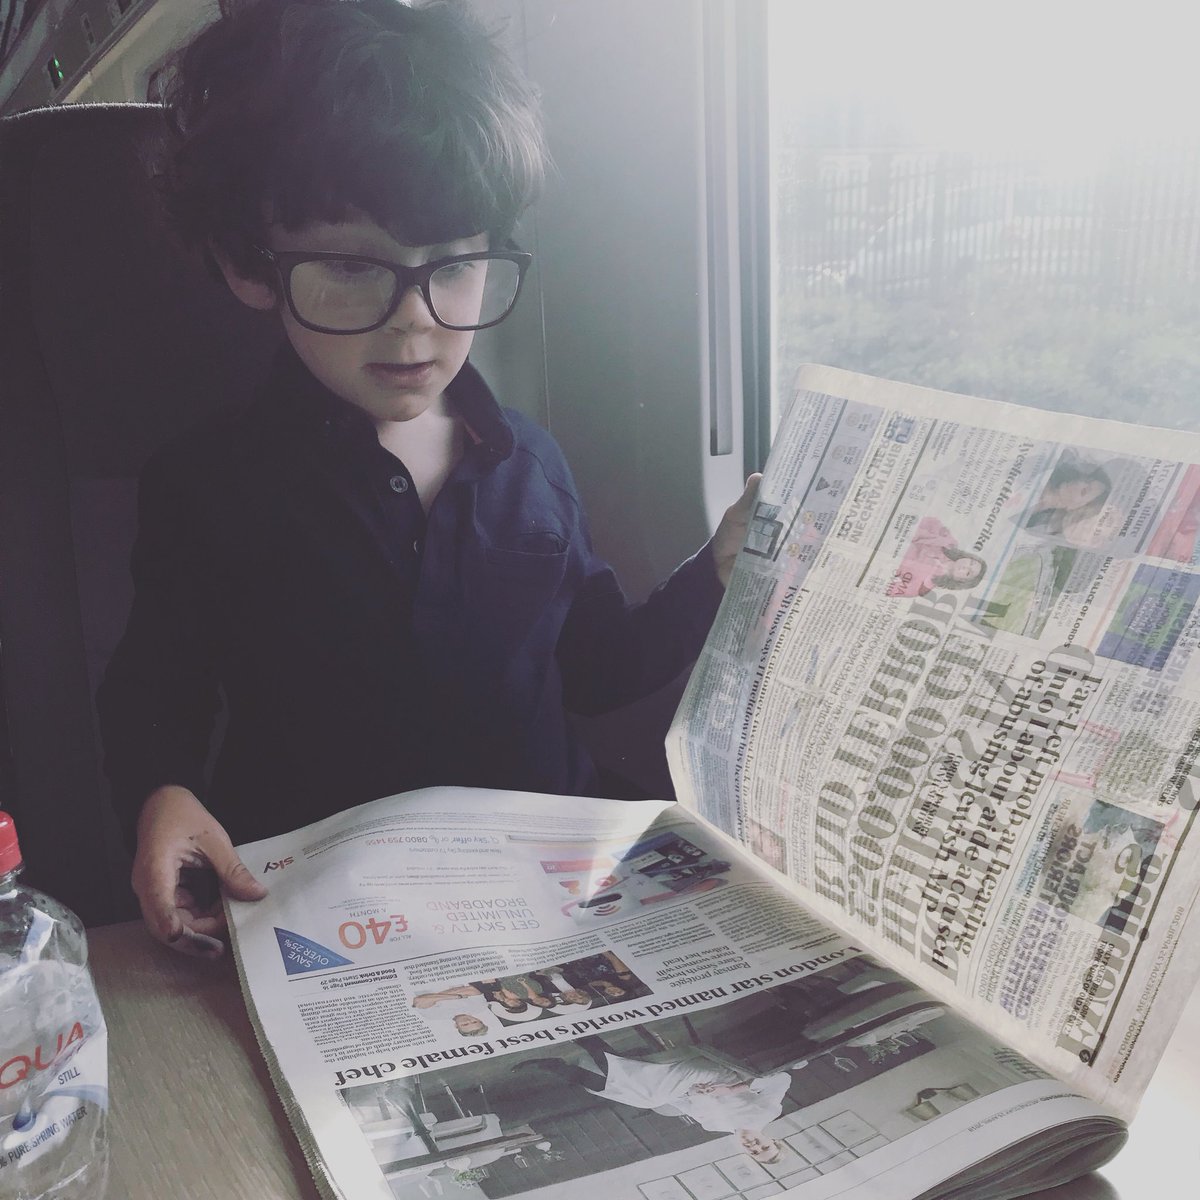 He’s meant to be 4 🤣😍💙 #reading #age4 #CutenessOverload #News #keepingitcool https://t.co/d1ly22dsw1.